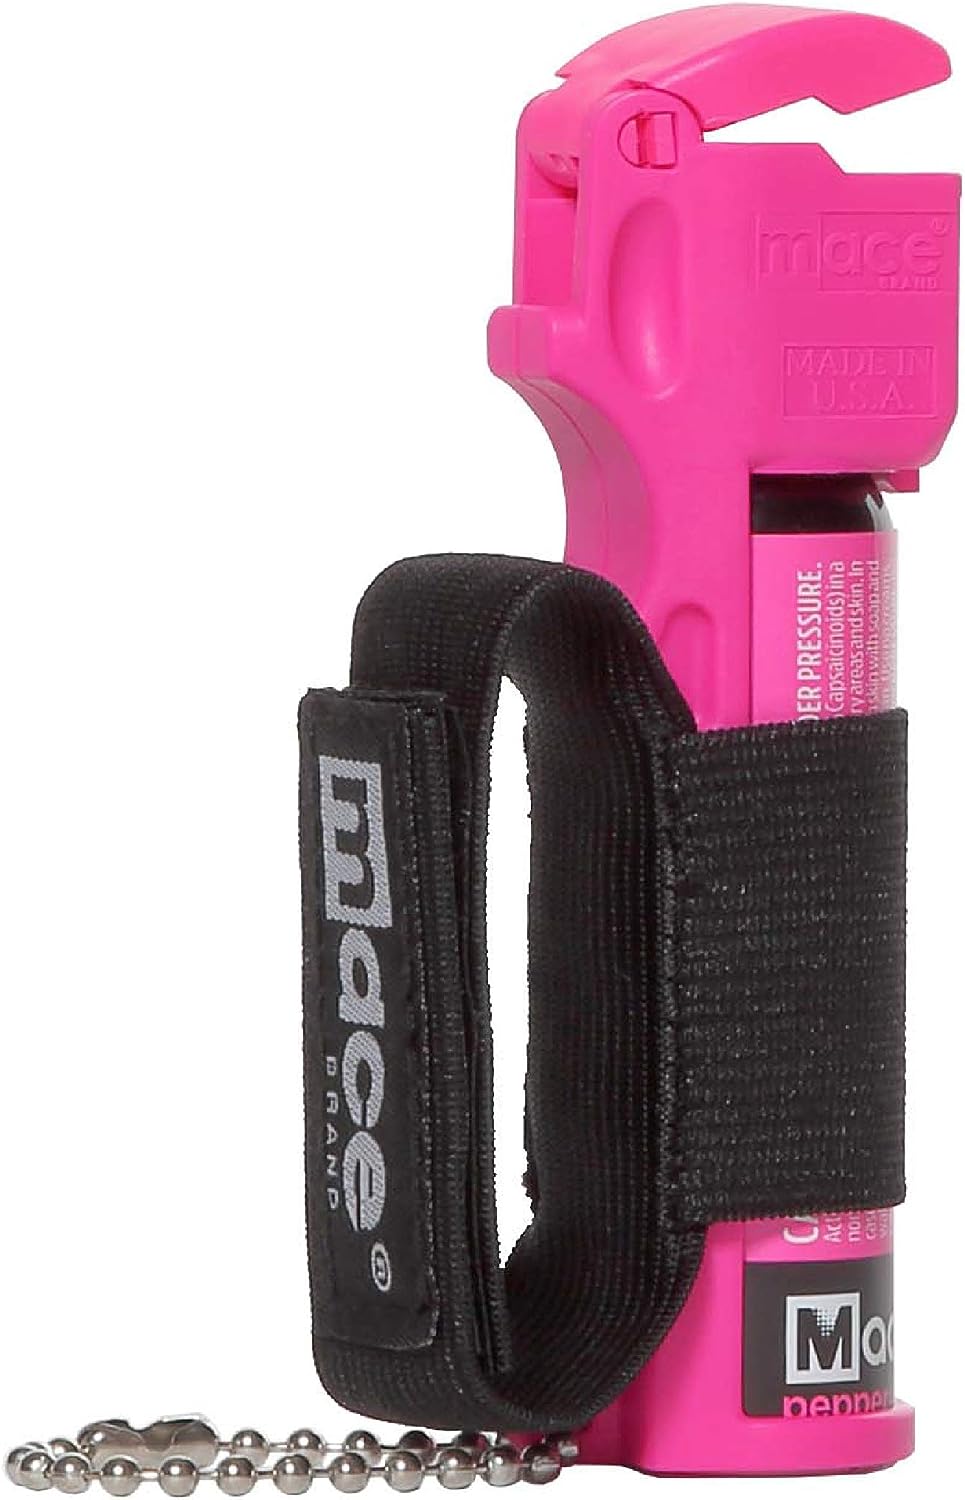 Mace Brand Sport Pepper Spray (Neon Pink) – Accurate [...]